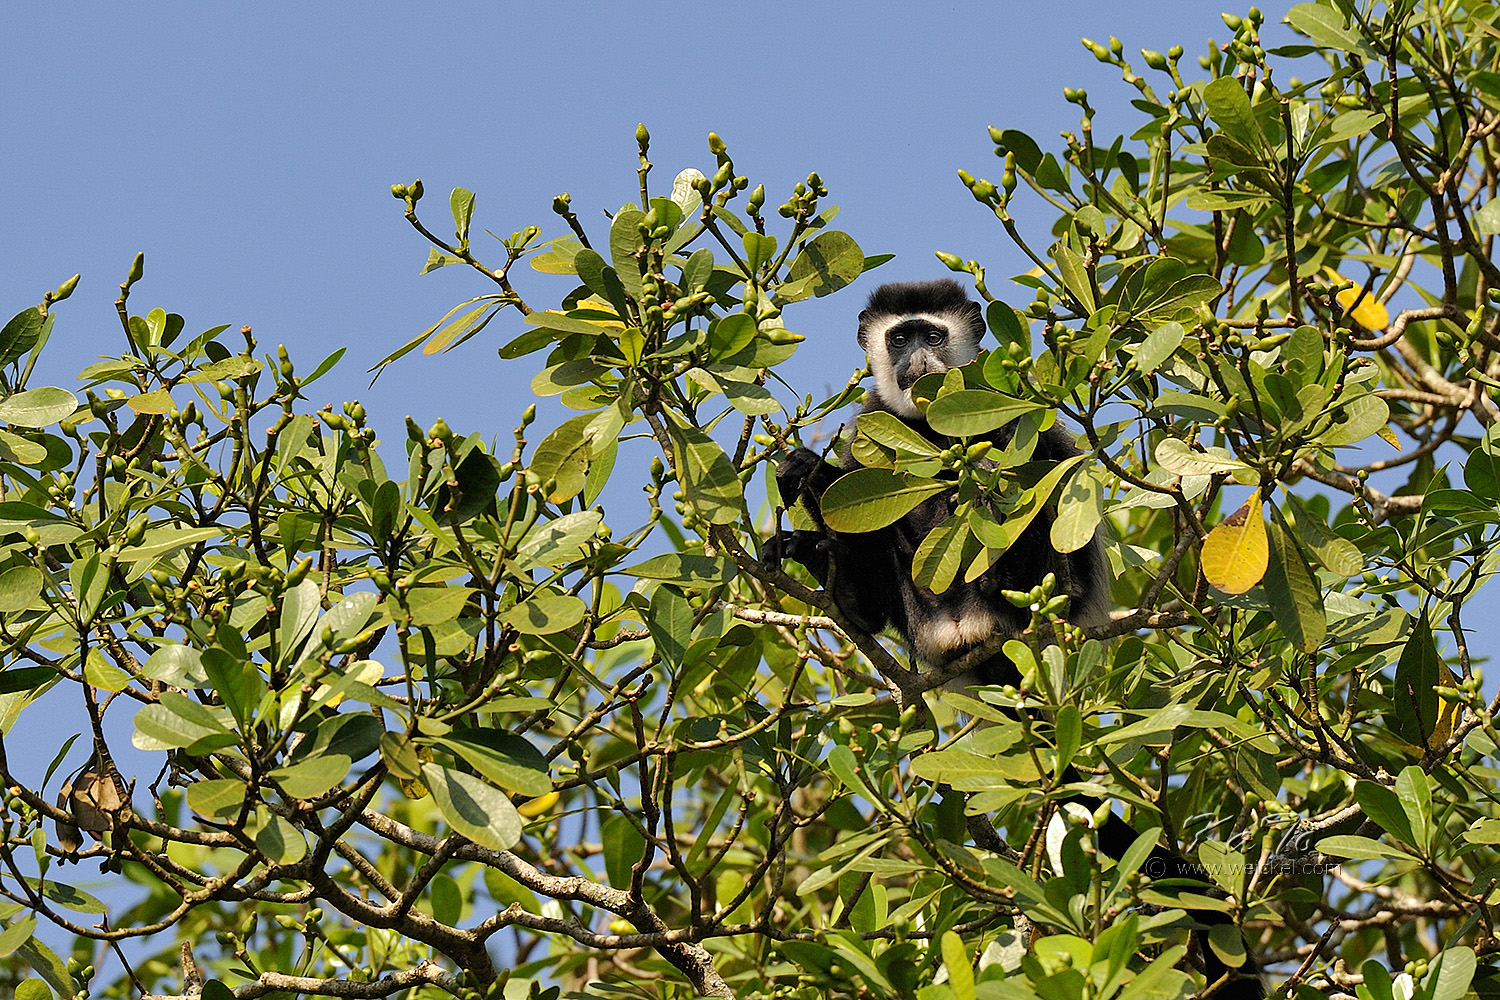 Kibale Forest N.P. - Black and White Colobus